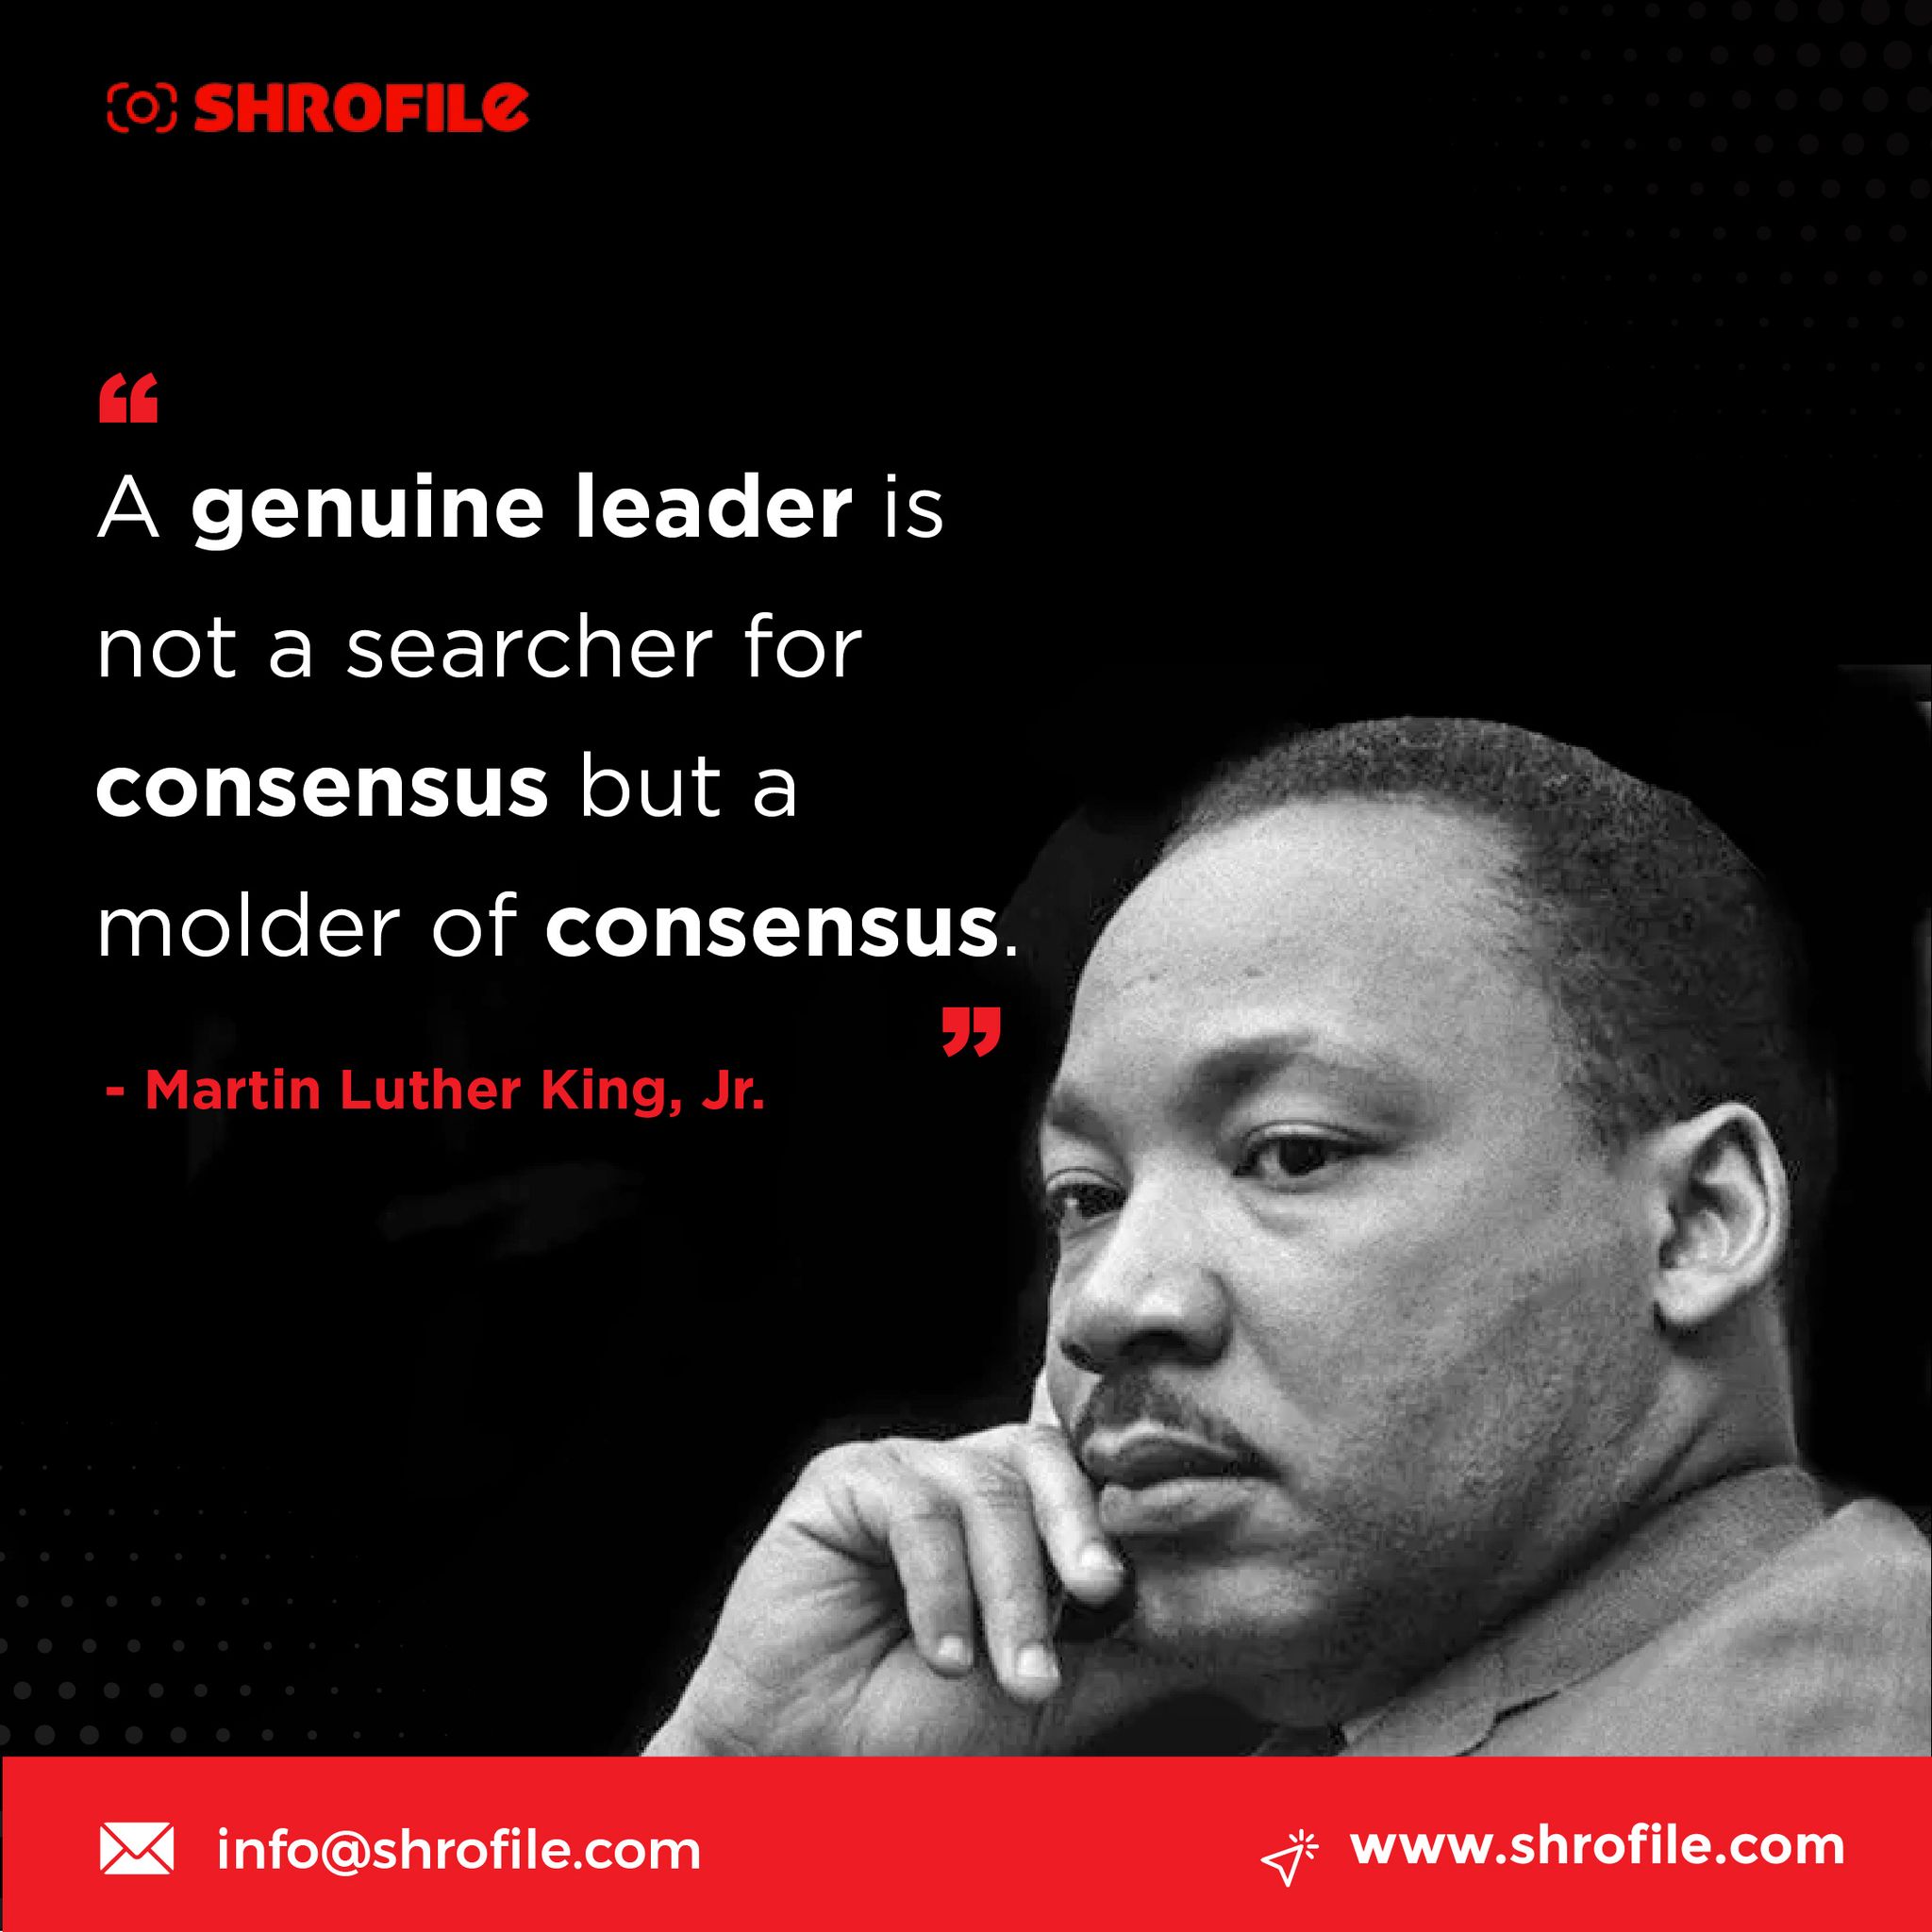 Martin Luther King, Jr Leadership Quotes